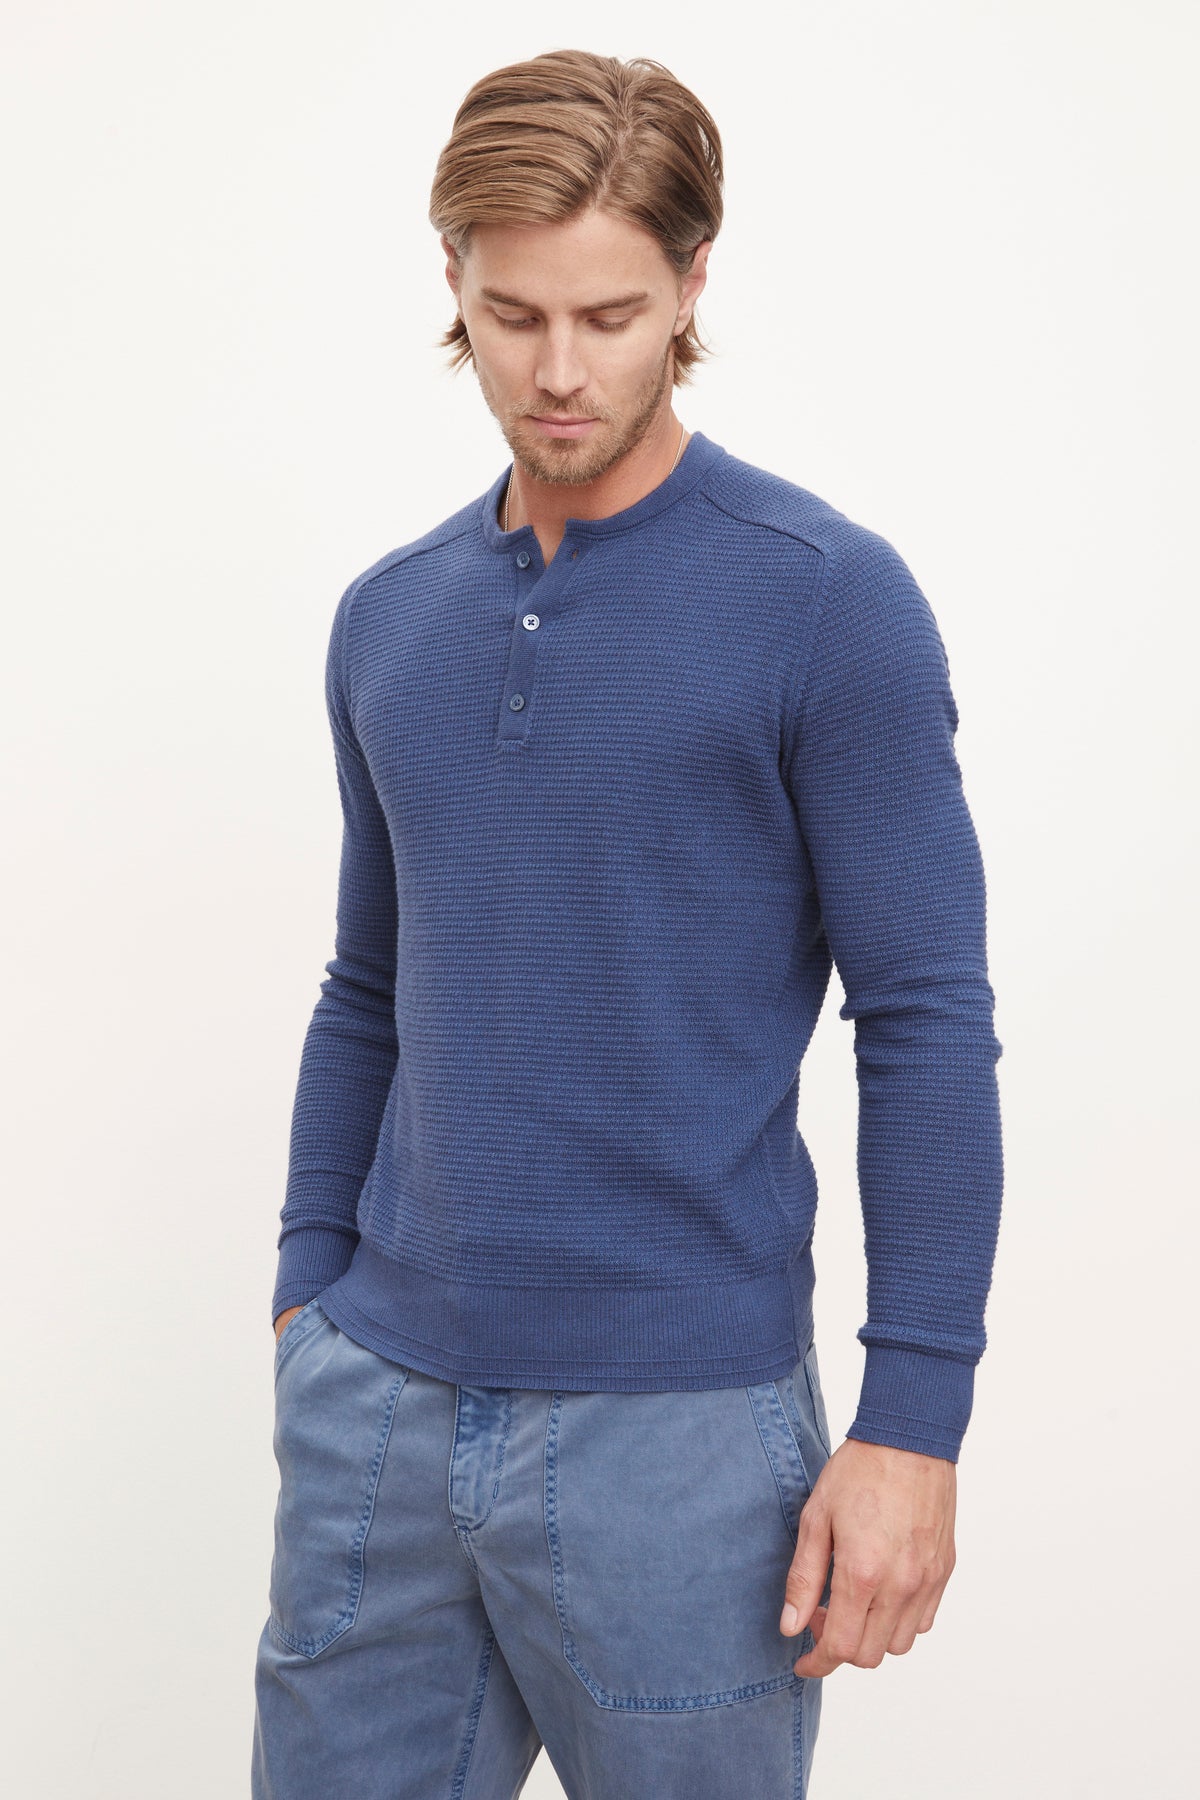 A man wearing a JAKE THERMAL HENLEY by Velvet by Graham & Spencer sweater and JAKE THERMAL HENLEY by Velvet by Graham & Spencer pants.-36009995206849